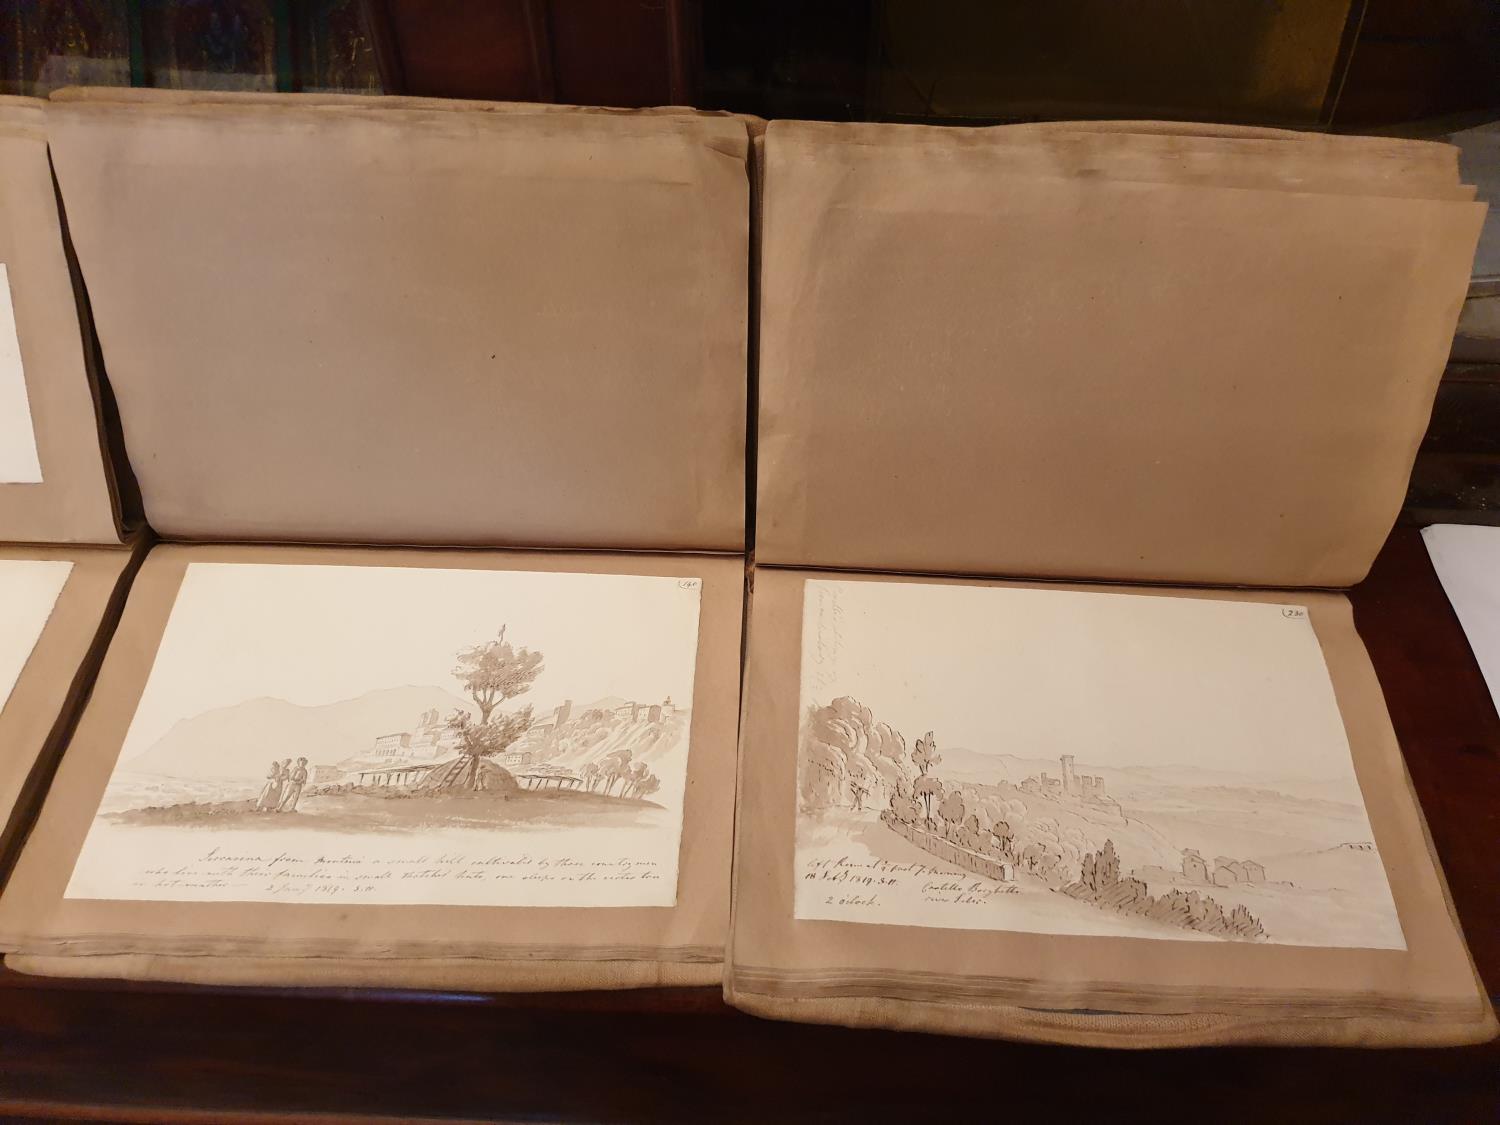 Three late 18th early 19th Century Sketch Books by Sophia Charlotte Haldimand (prinsep). Some of - Image 6 of 9